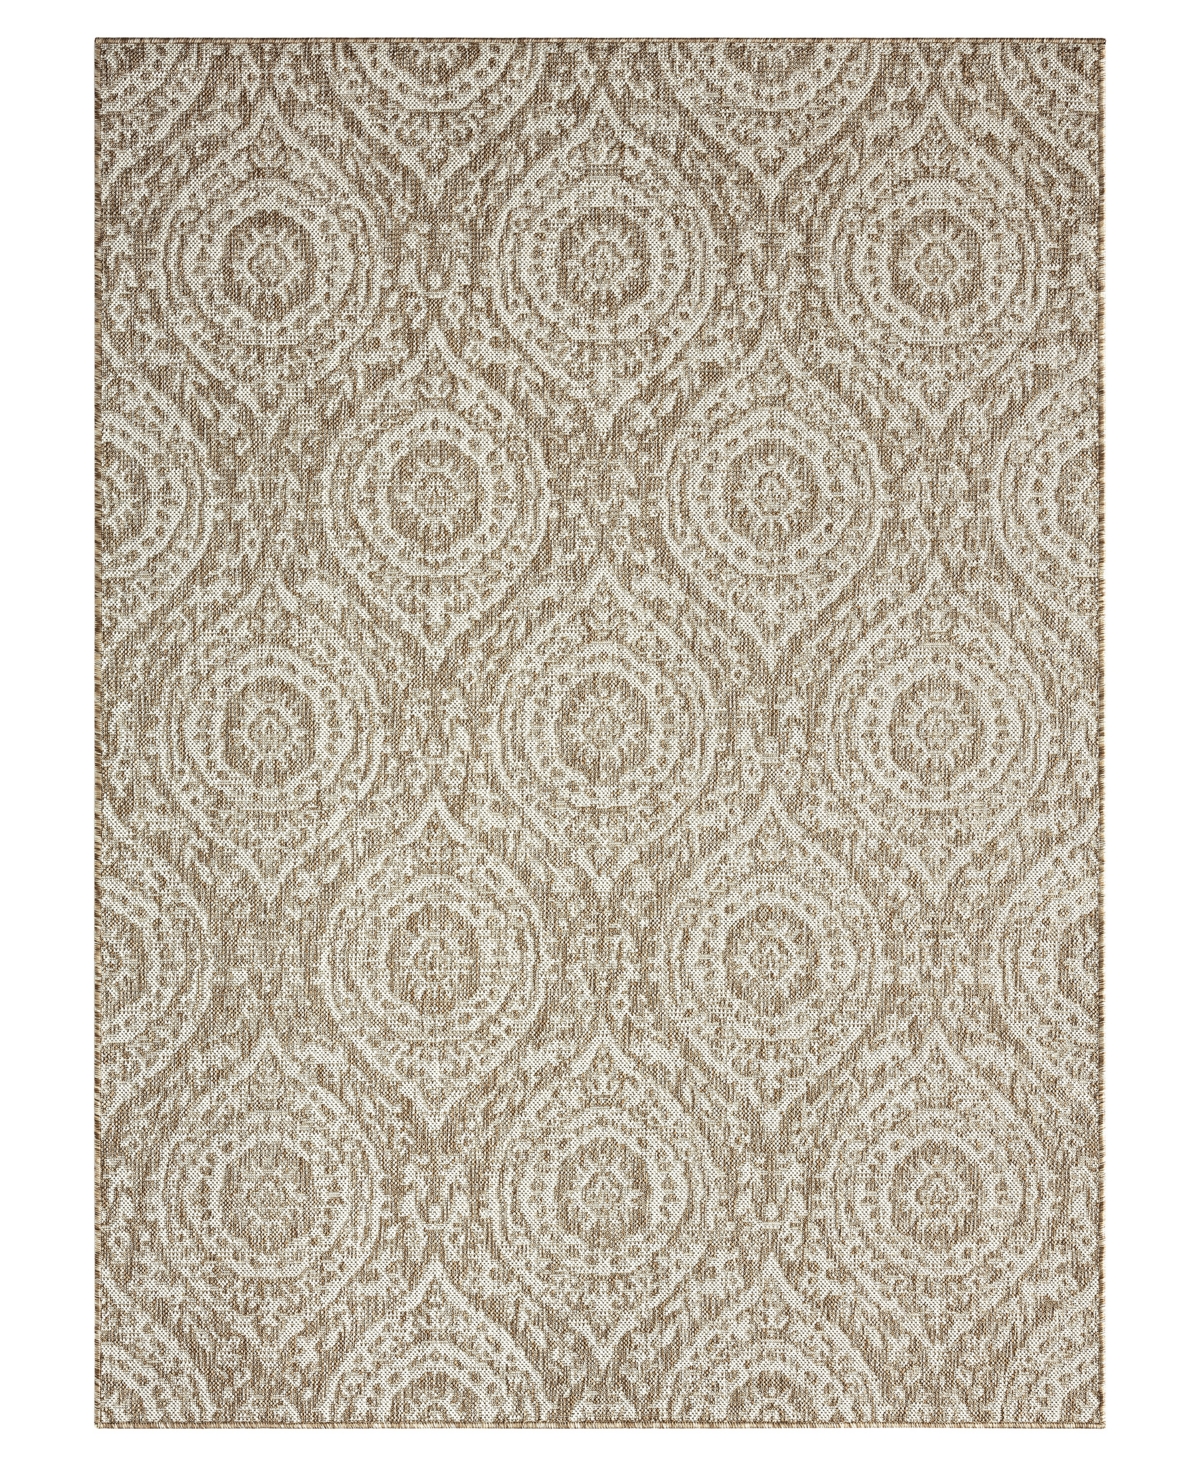 Nicole Miller Patio Country Zoe 7'9" X 10'2" Outdoor Area Rug In Taupe